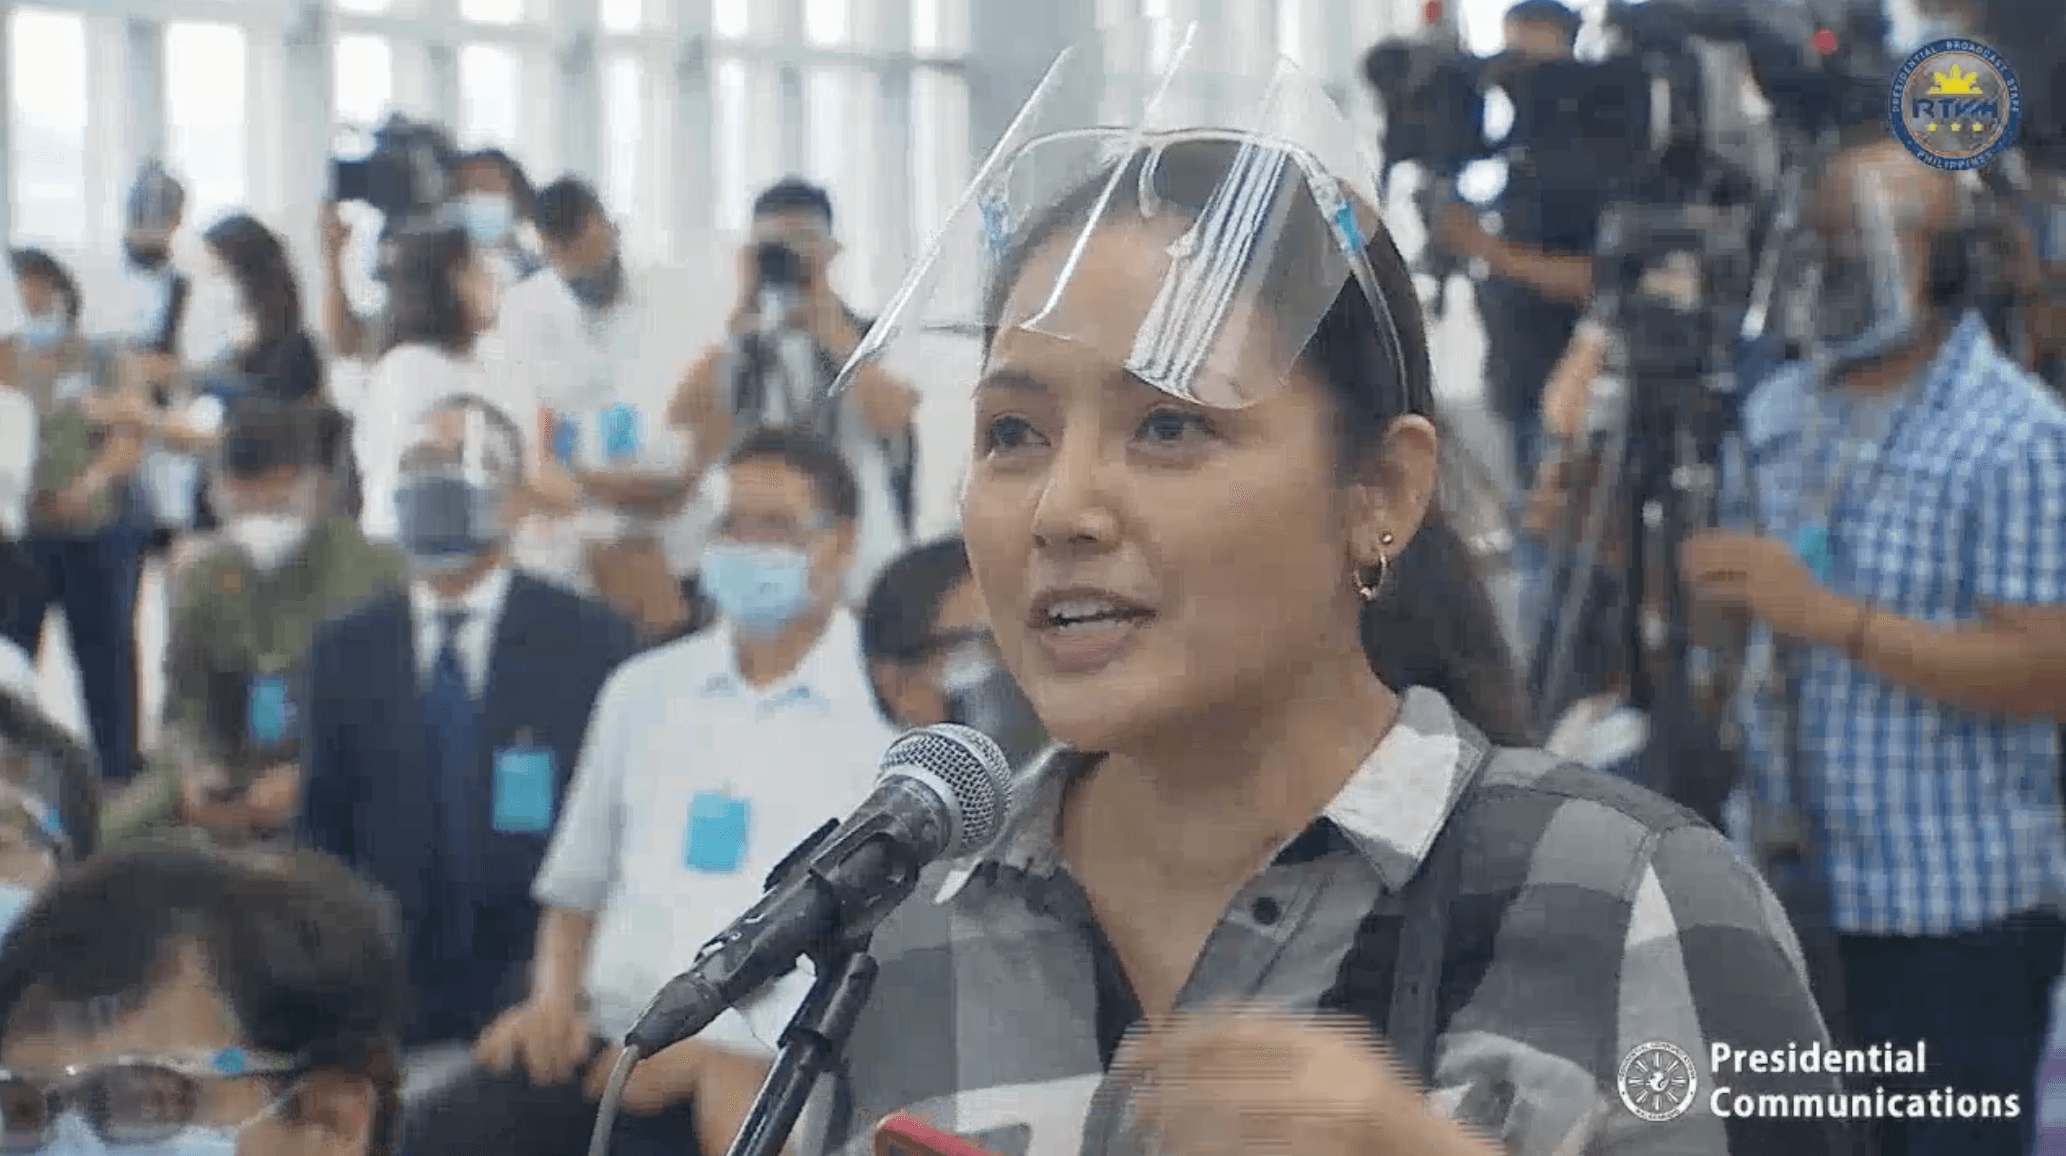 Duterte asks reporter to take off mask, face shield during press conference